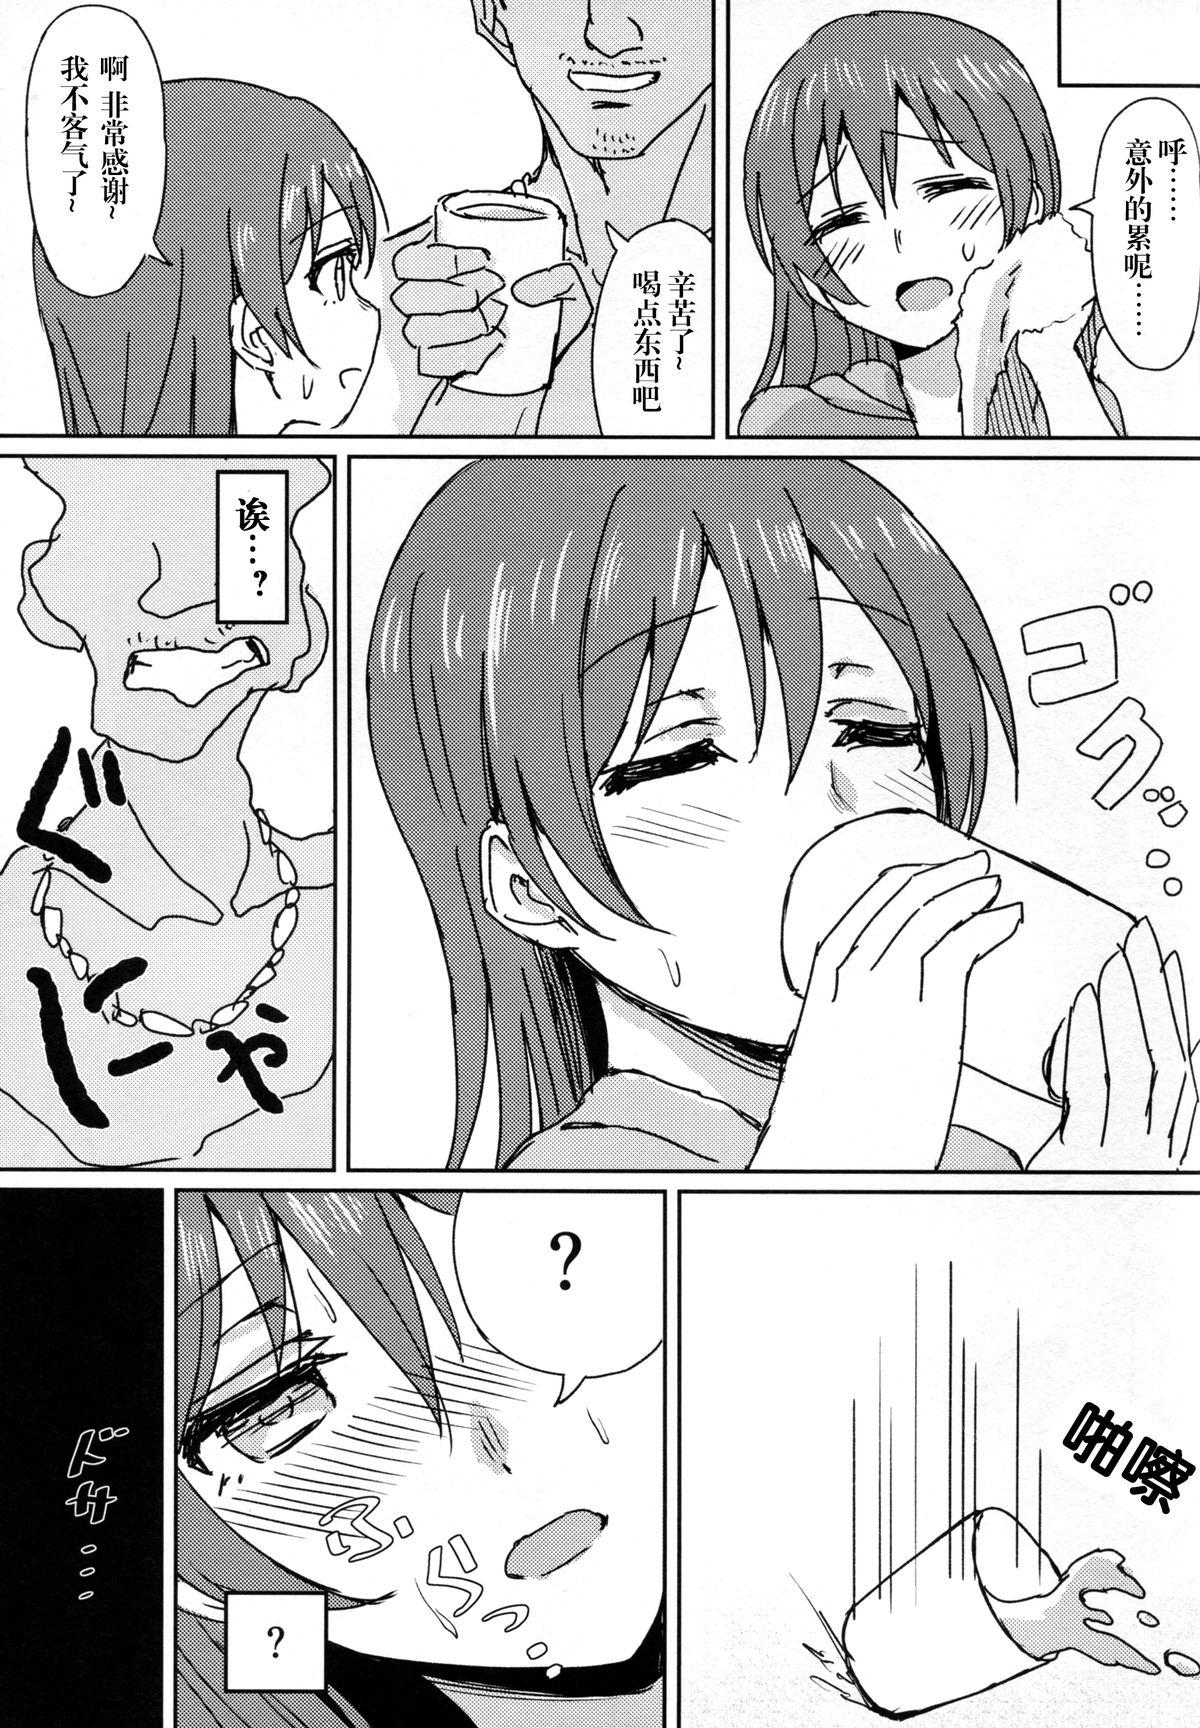 Role Play Hah,Wrench This! - Love live Joven - Page 10